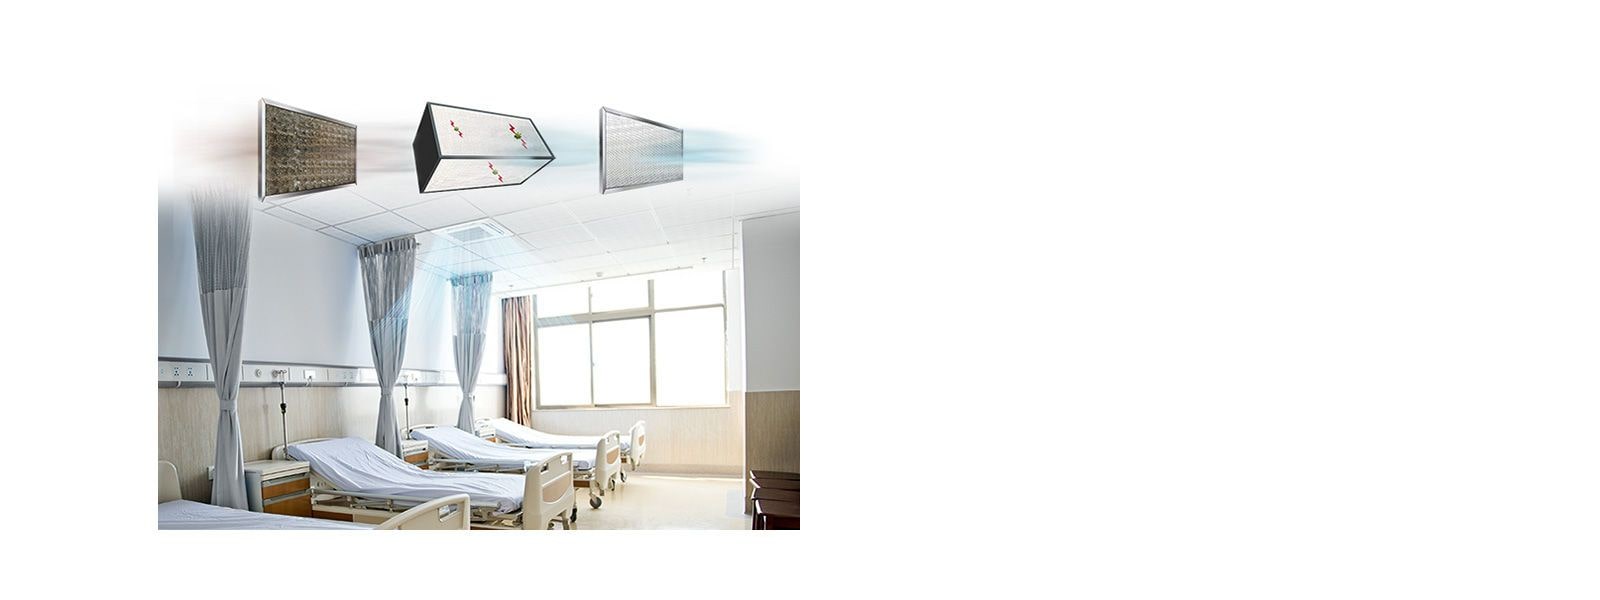 Ceiling mounted unit creates air streams in a patient room with three beds and curtains. Three separate components at the top display air filtering process. 